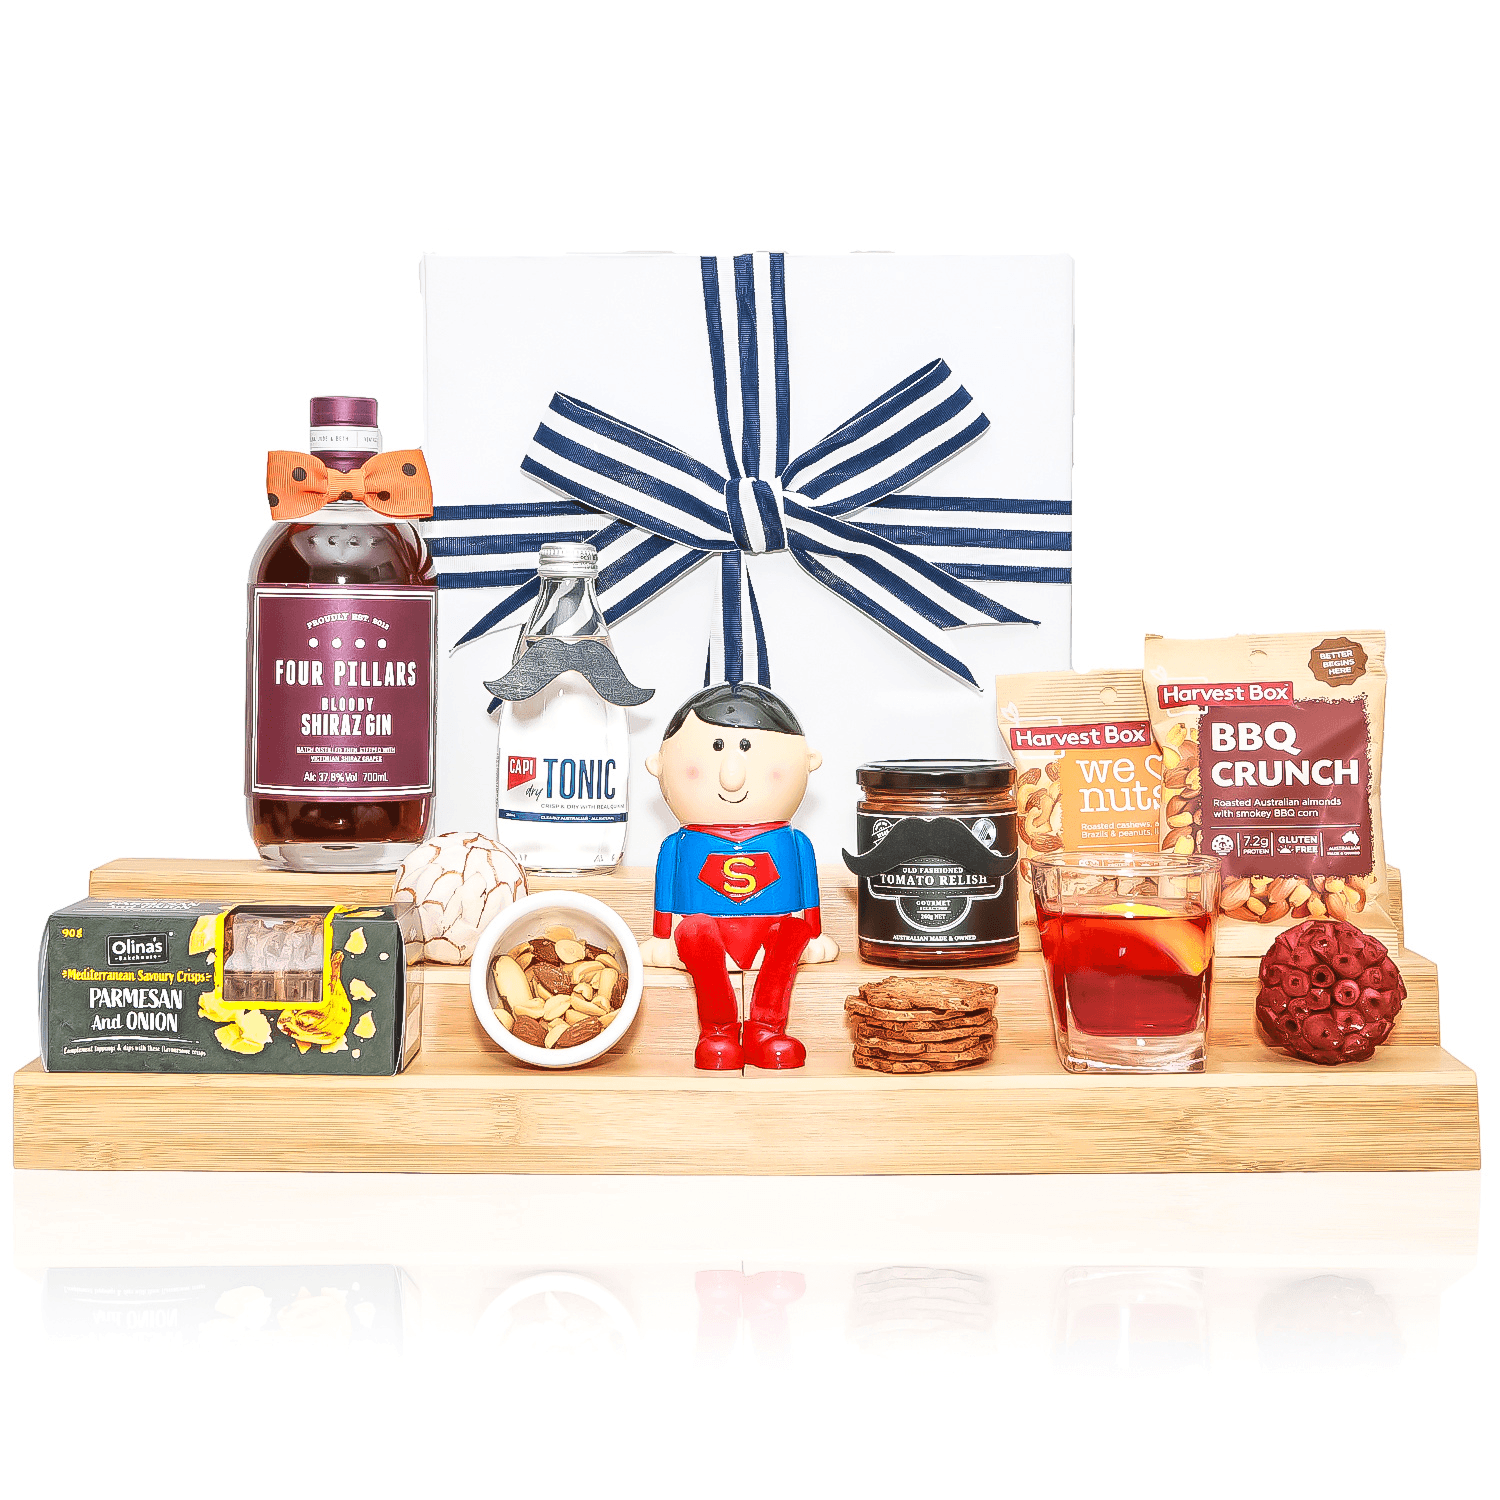 Fathers Day Gin Hamper - Healthy Belly Hampers - pure indulgence - birthday hampers - gift hampers - gift hampers melbourne - gift hampers australia - organic hampers -vegan hampers - gluten free hampers - birthday hampers -anniversary hampers - wedding hampers - alcohol hampers